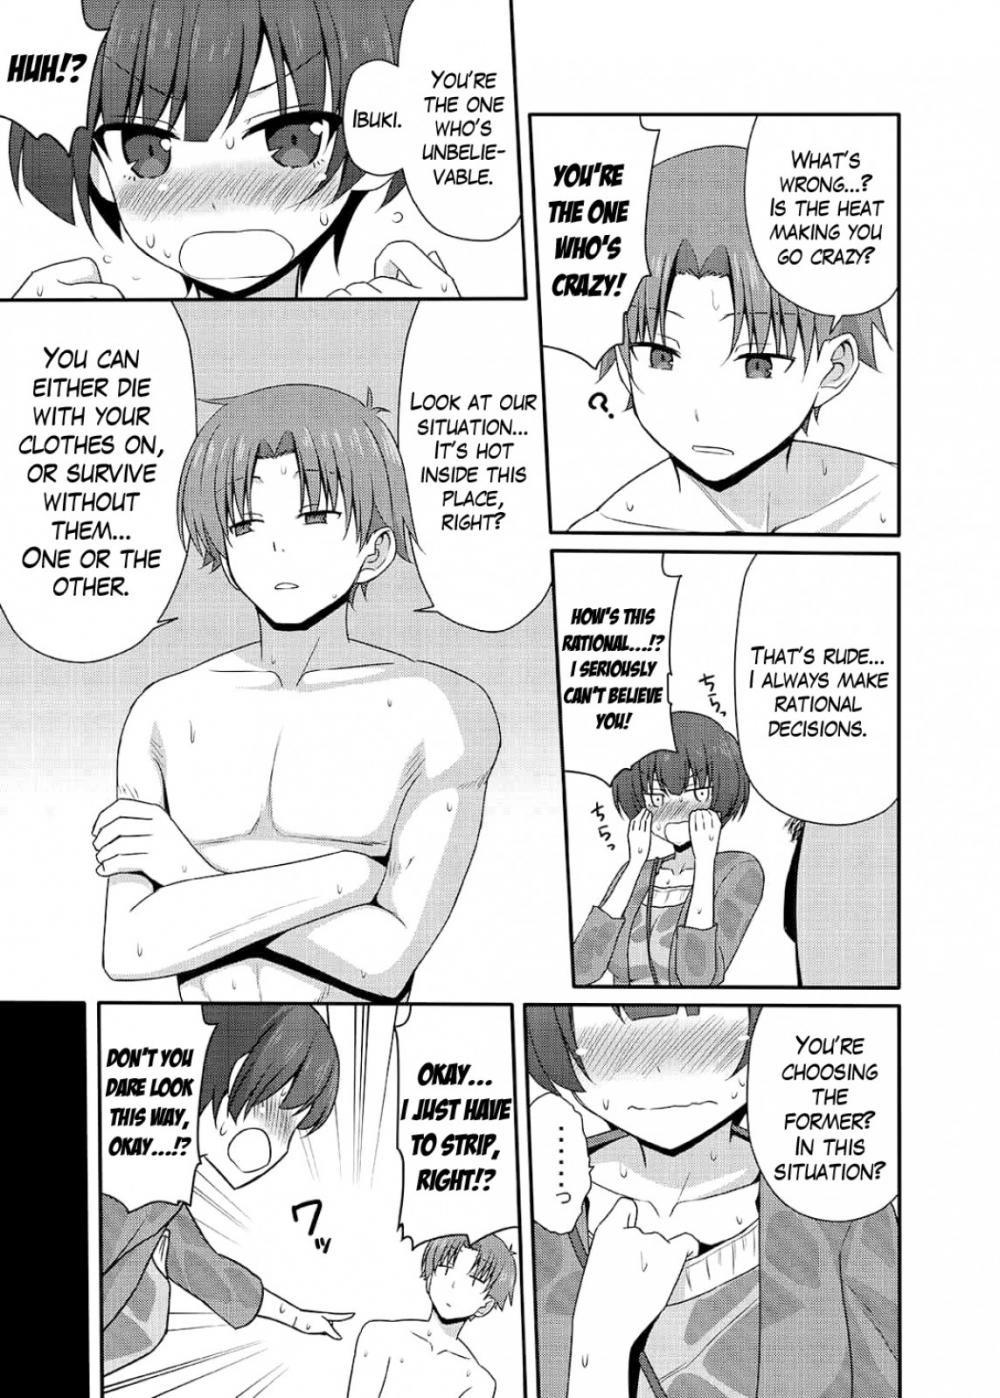 Hentai Manga Comic-I Had To Use Force After all-Read-16